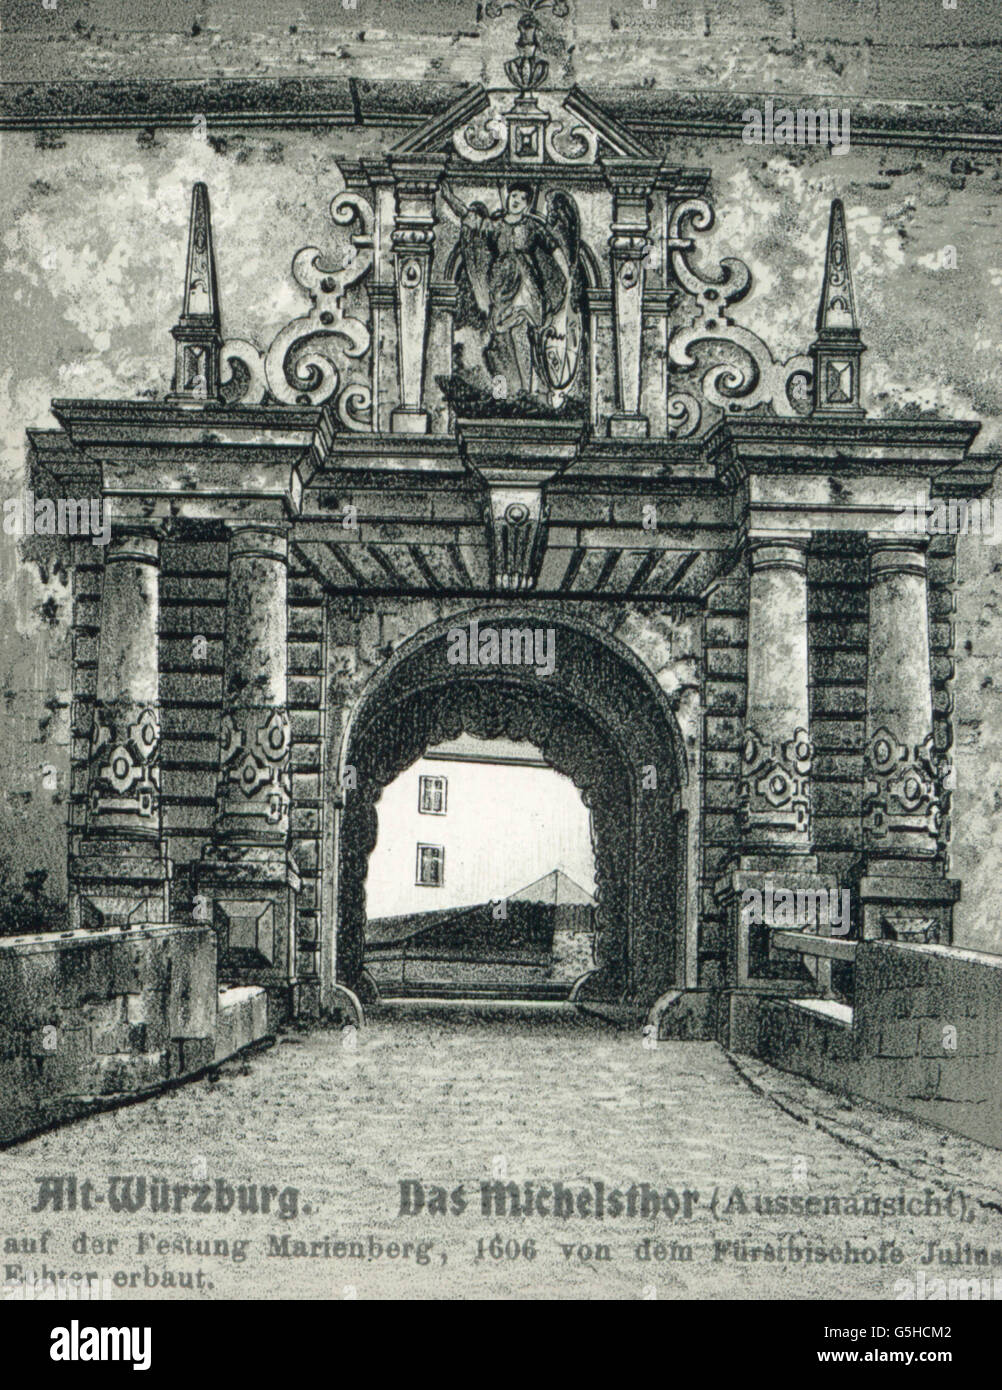 geography / travel, Germany, Wuerzburg, fortress Marienberg, Michelstor, exterior view, drawing, postcard, publisher Gustav Erdmann, late 19th century, gate, gates, doorway, series Alt-Würzburg, Lower Franconia, Kingdom of Bavaria, Central Europe, fortress, fortresses, postcard, postal card, postcards, postal cards, publisher, publishers, historic, historical, Wuerzburg, Würzburg, Wurzburg, Additional-Rights-Clearences-Not Available Stock Photo